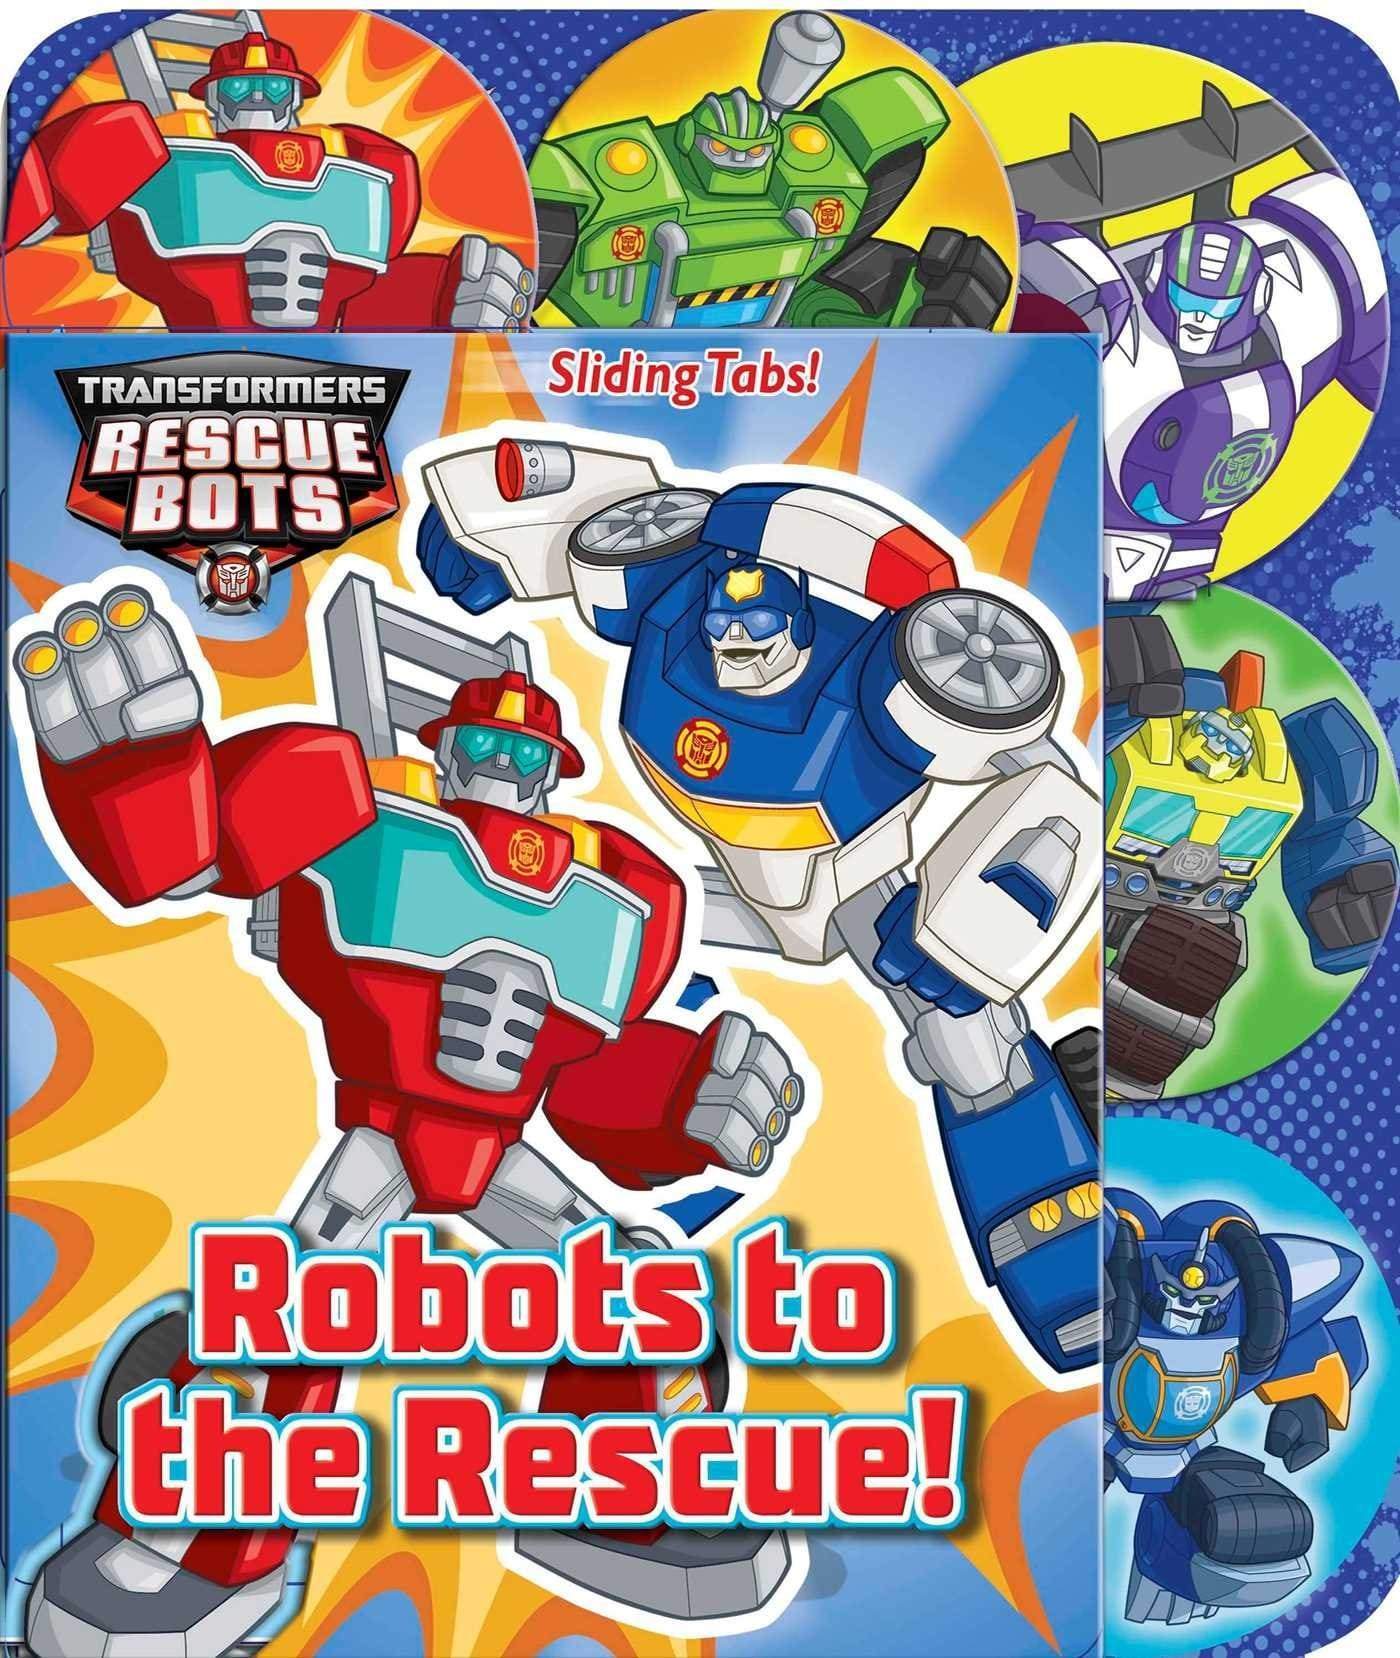 Transformers Rescue Bots - Robots To The Rescue!